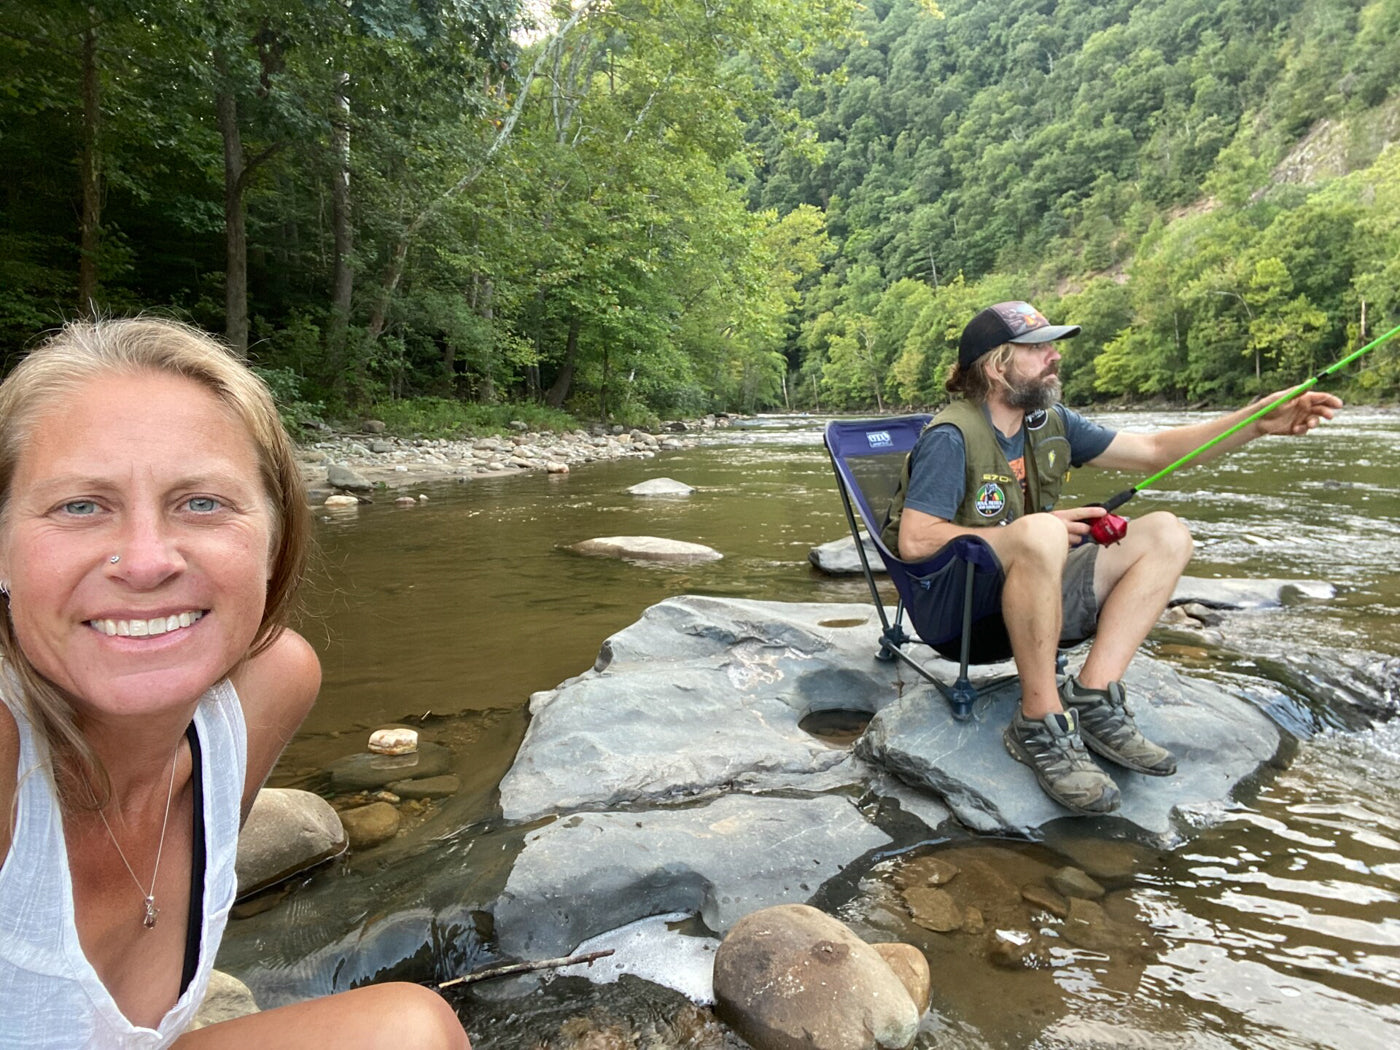 Two people sit in chairs in the creek together and fish, while posing for a selfie. 